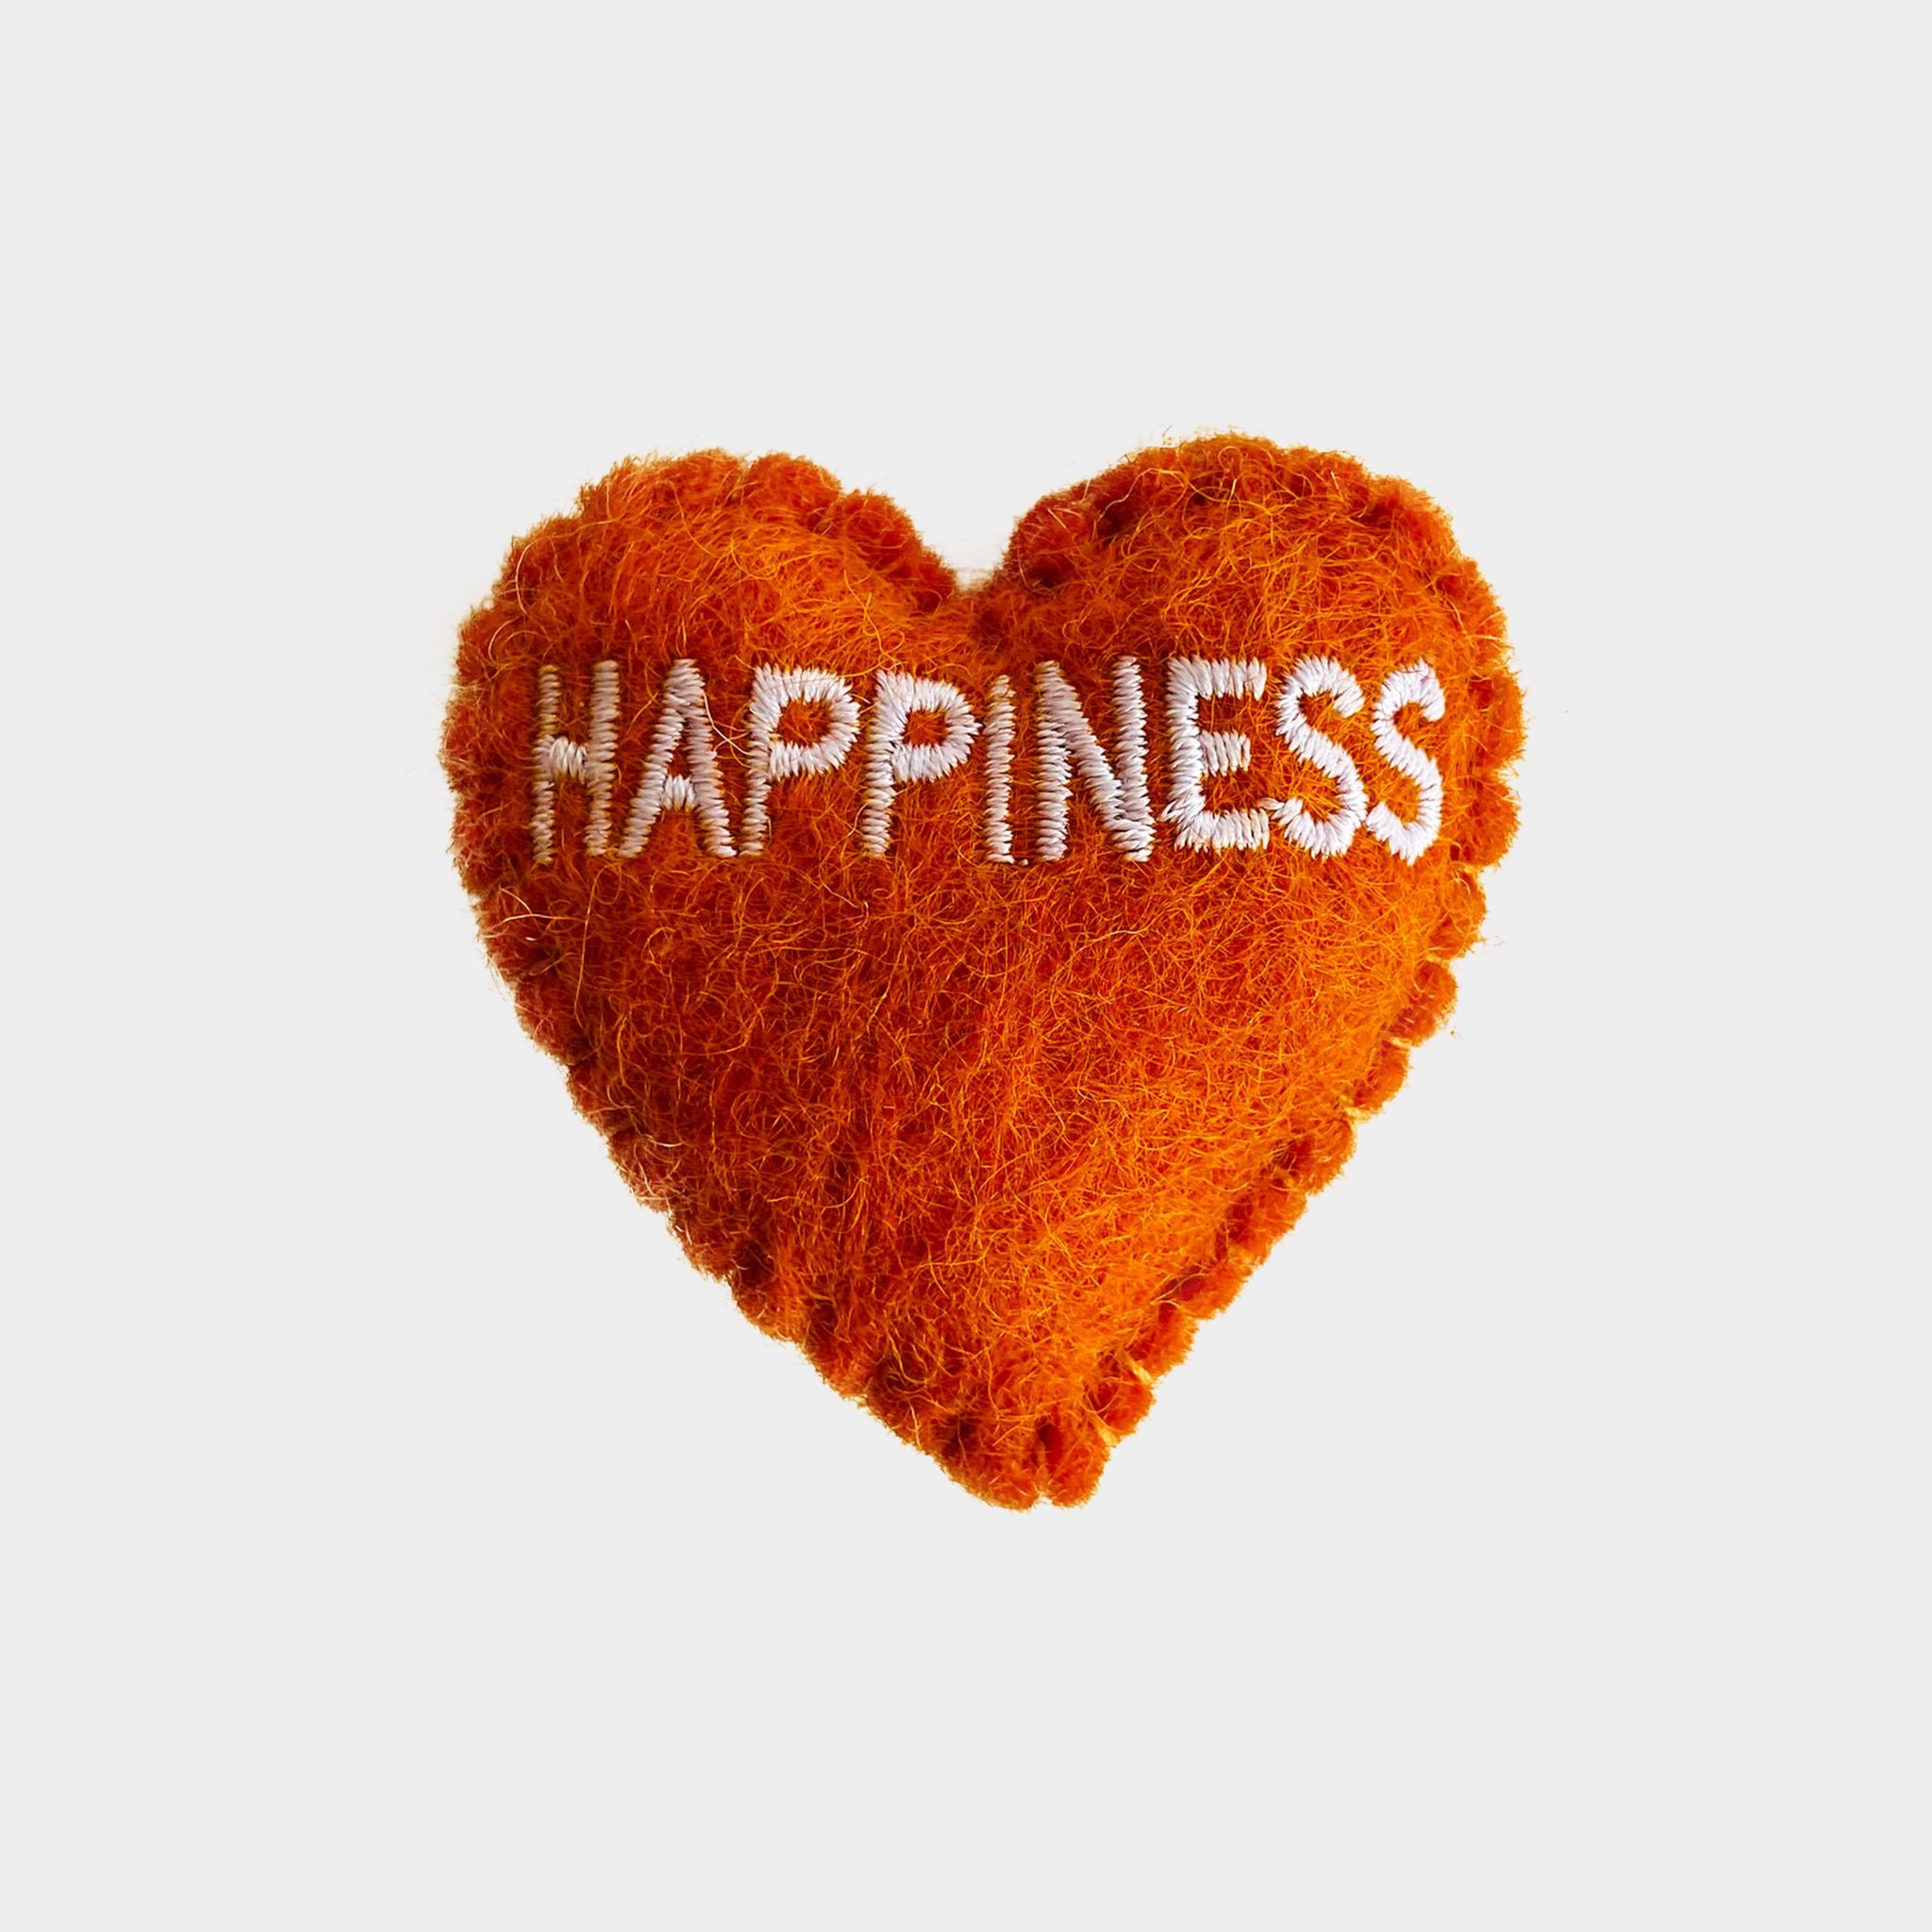 Happiness Heart – The Heart's Intentions